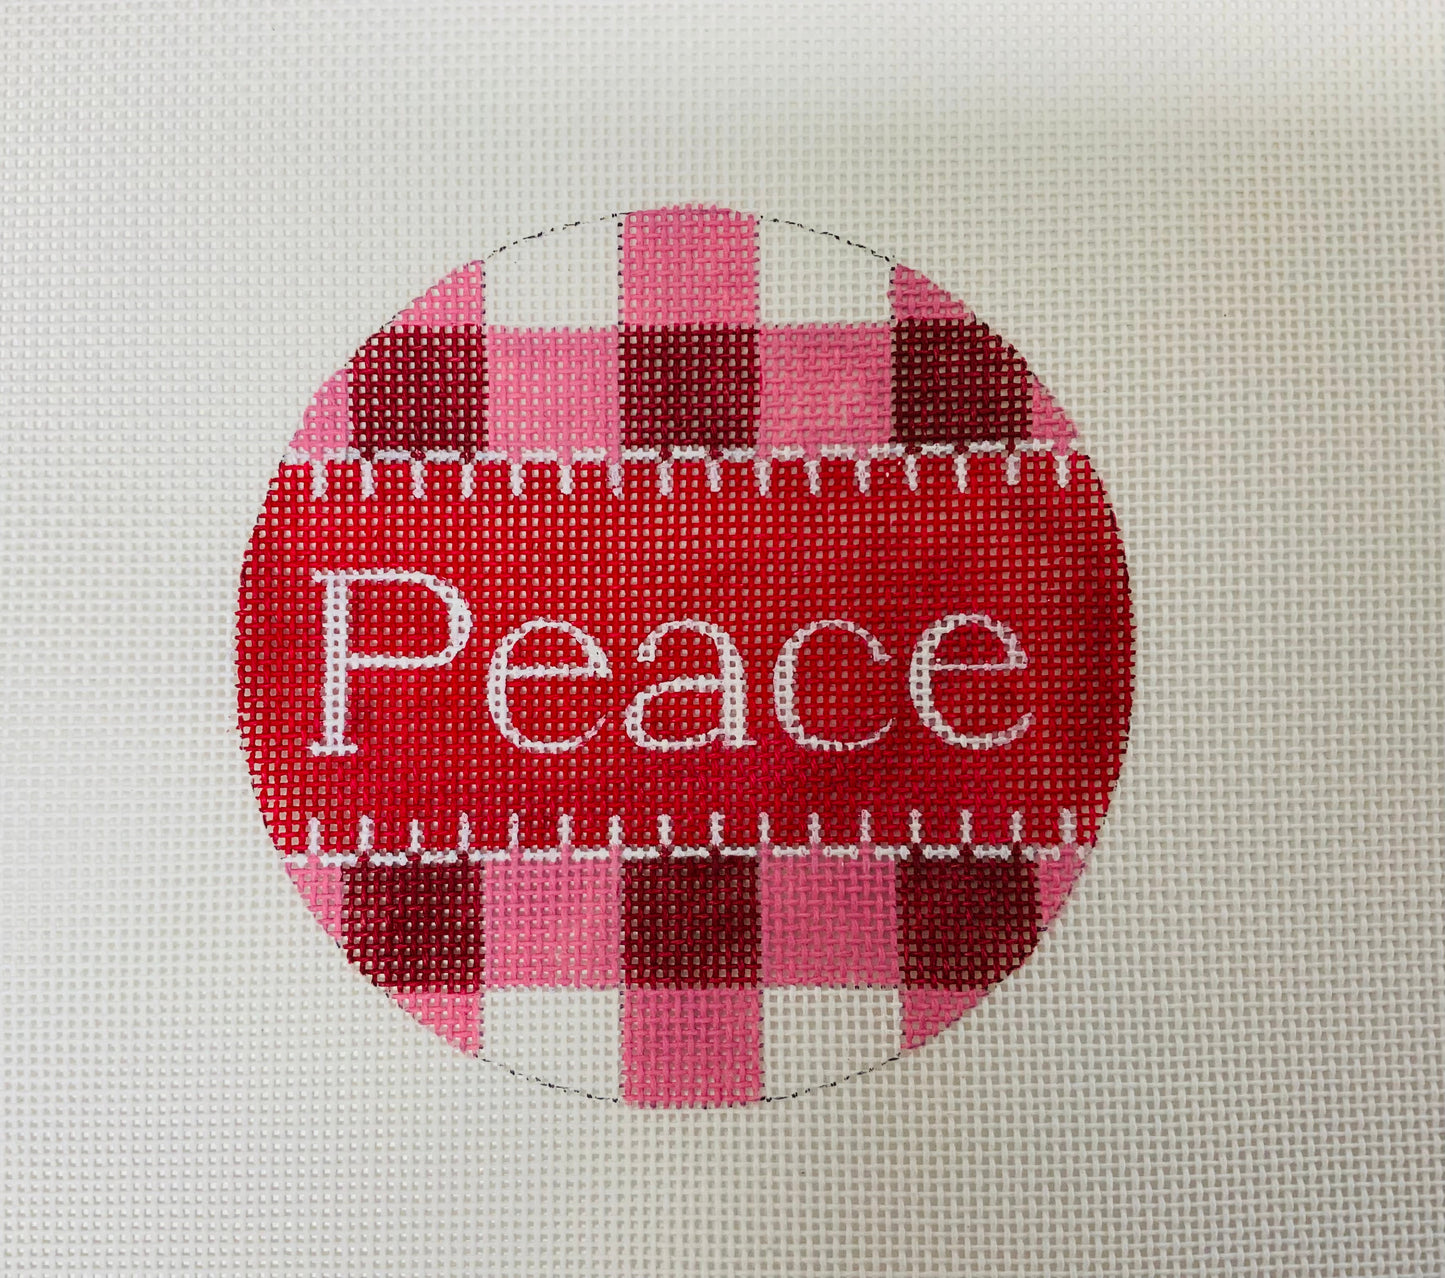 Peace Gingham in Red Needlecraft Canvas